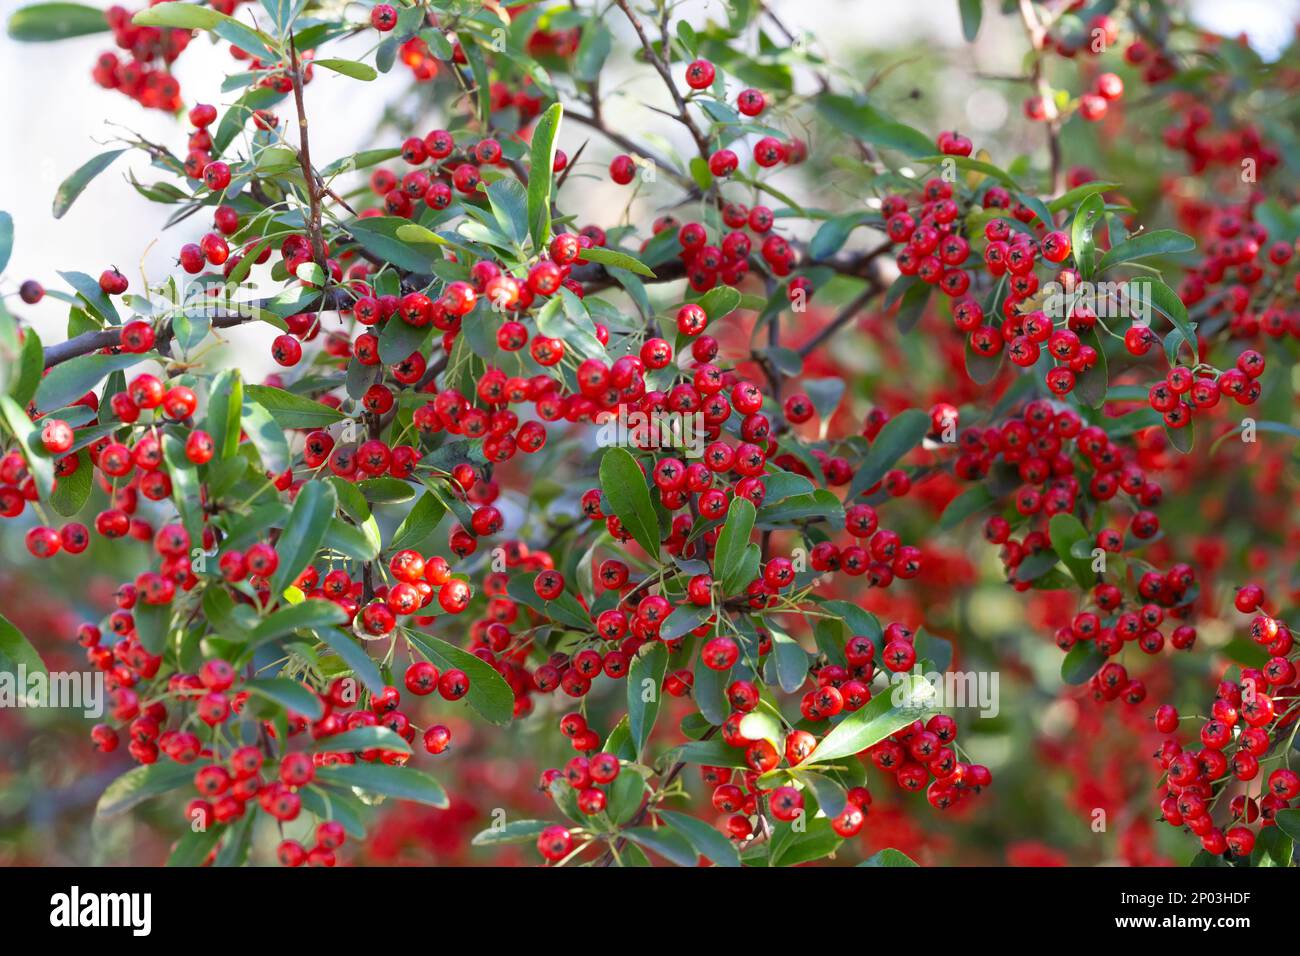 Bokeh background of A Brilliant Red Chokeberry Aronia arbutifolia bursting with red berries selective focus Stock Photo